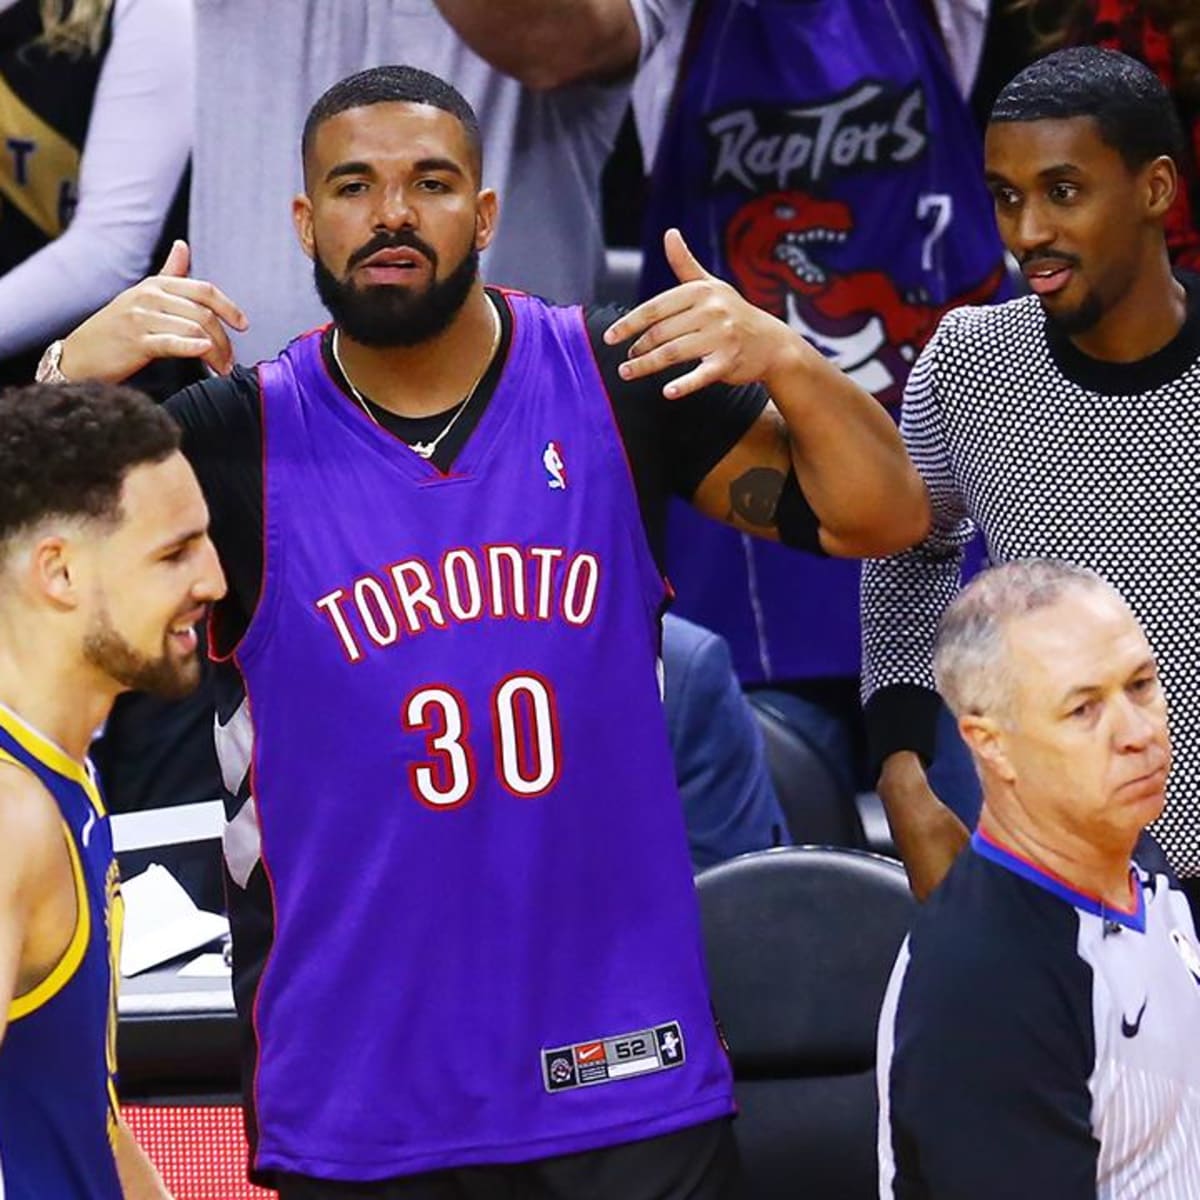 Smash Mouth calls on Drake to behave on sideline during NBA Finals